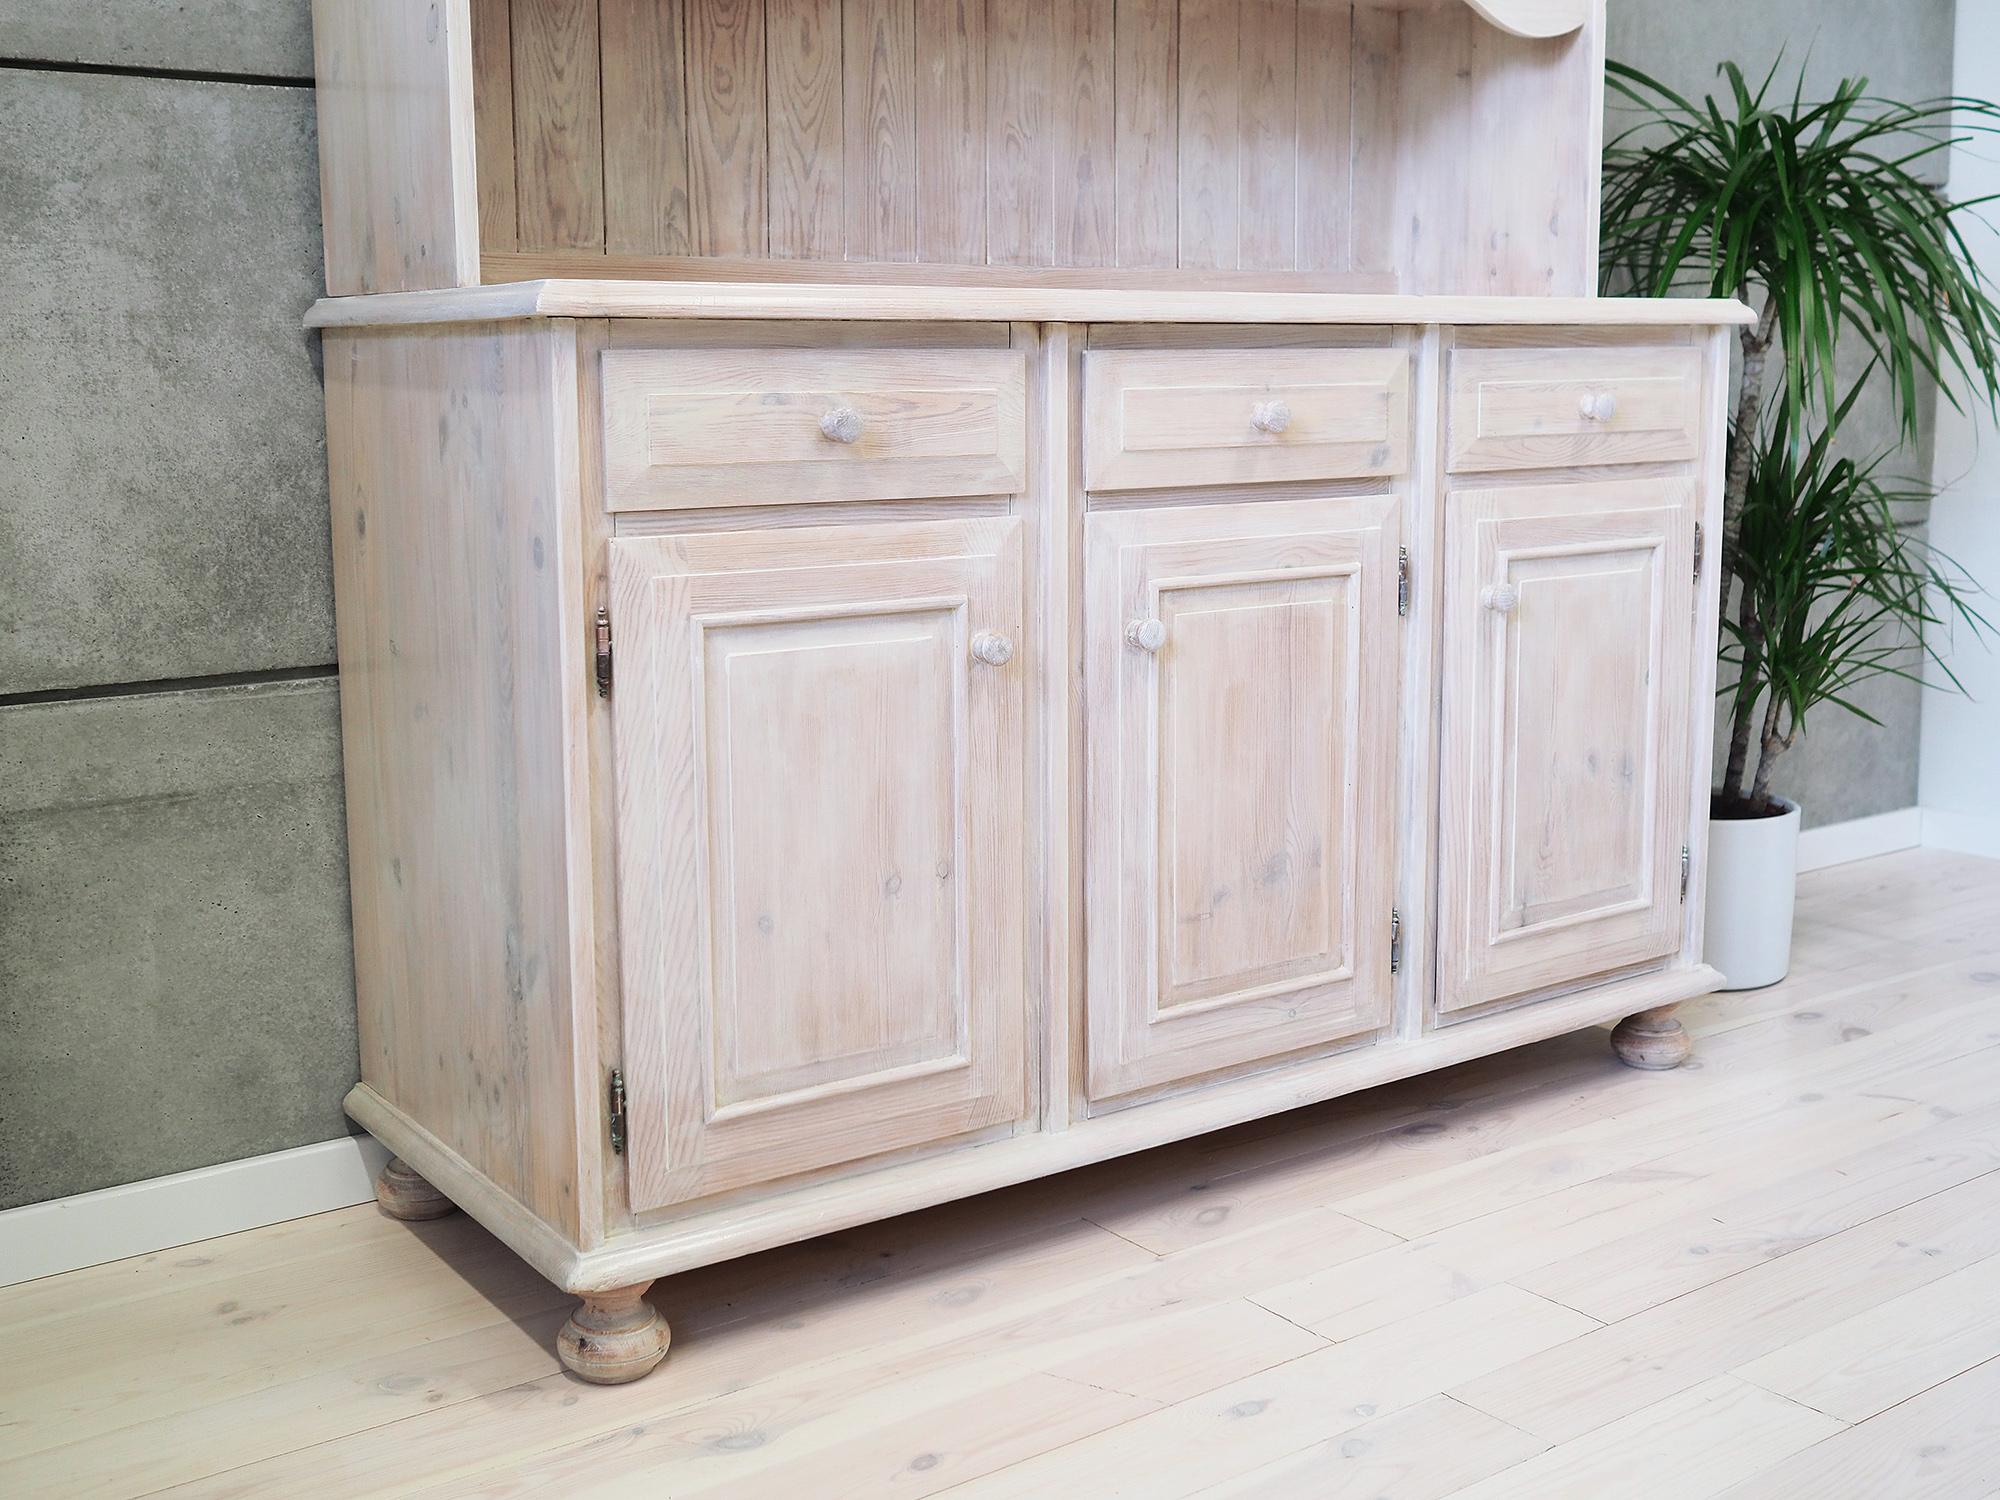 Late 20th Century Credenza Pine, 1980s, Provence Style For Sale